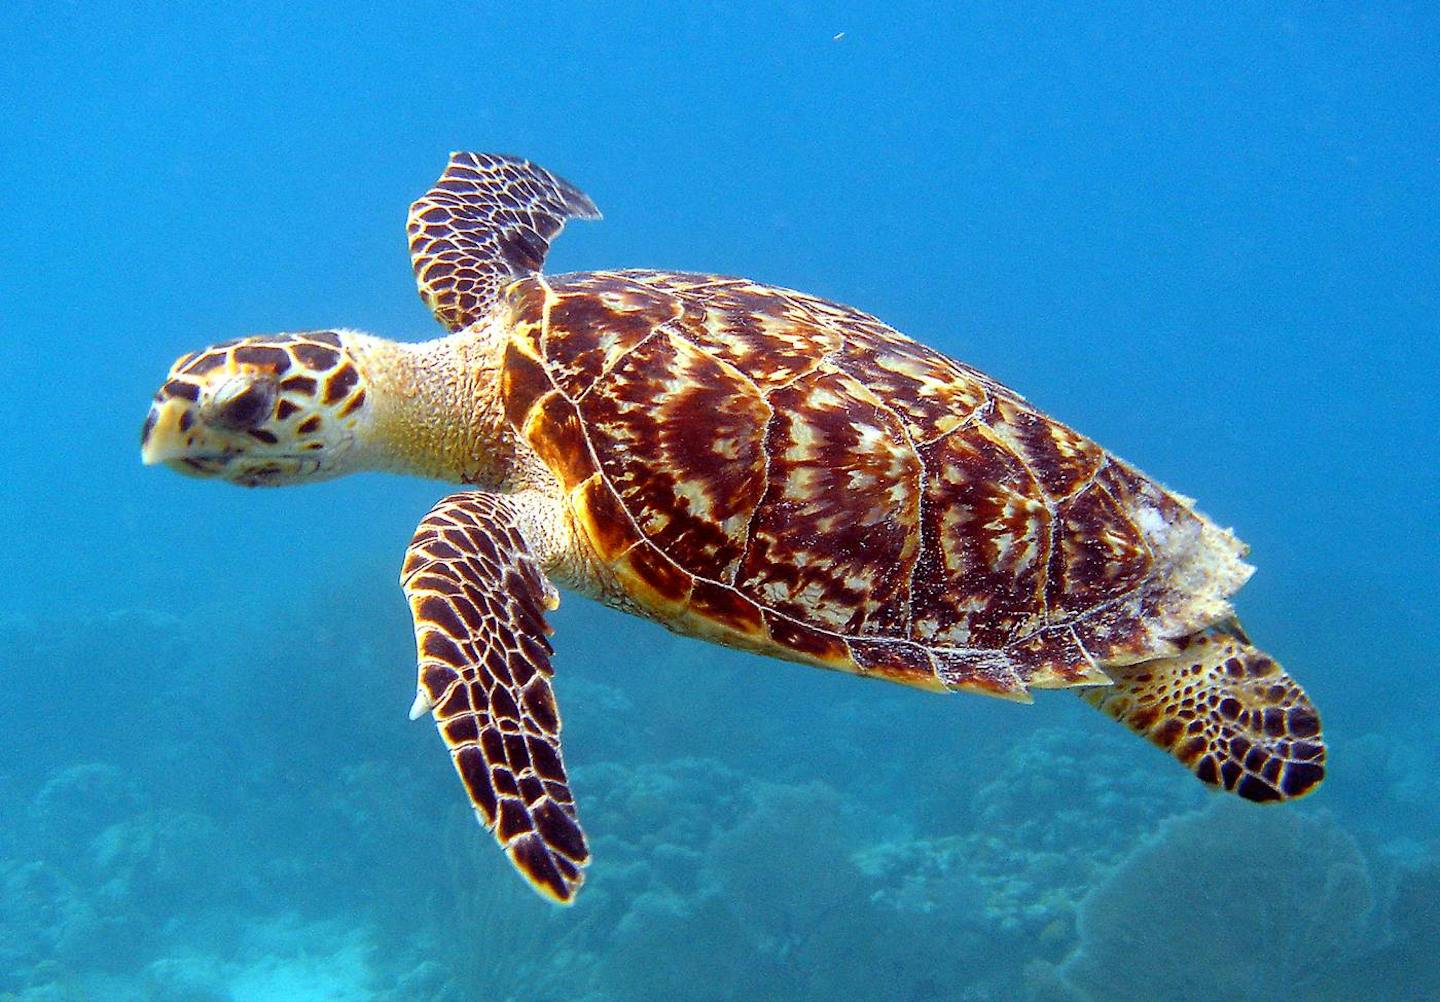 The remarkable tropical life of the Hawksbill sea turtle